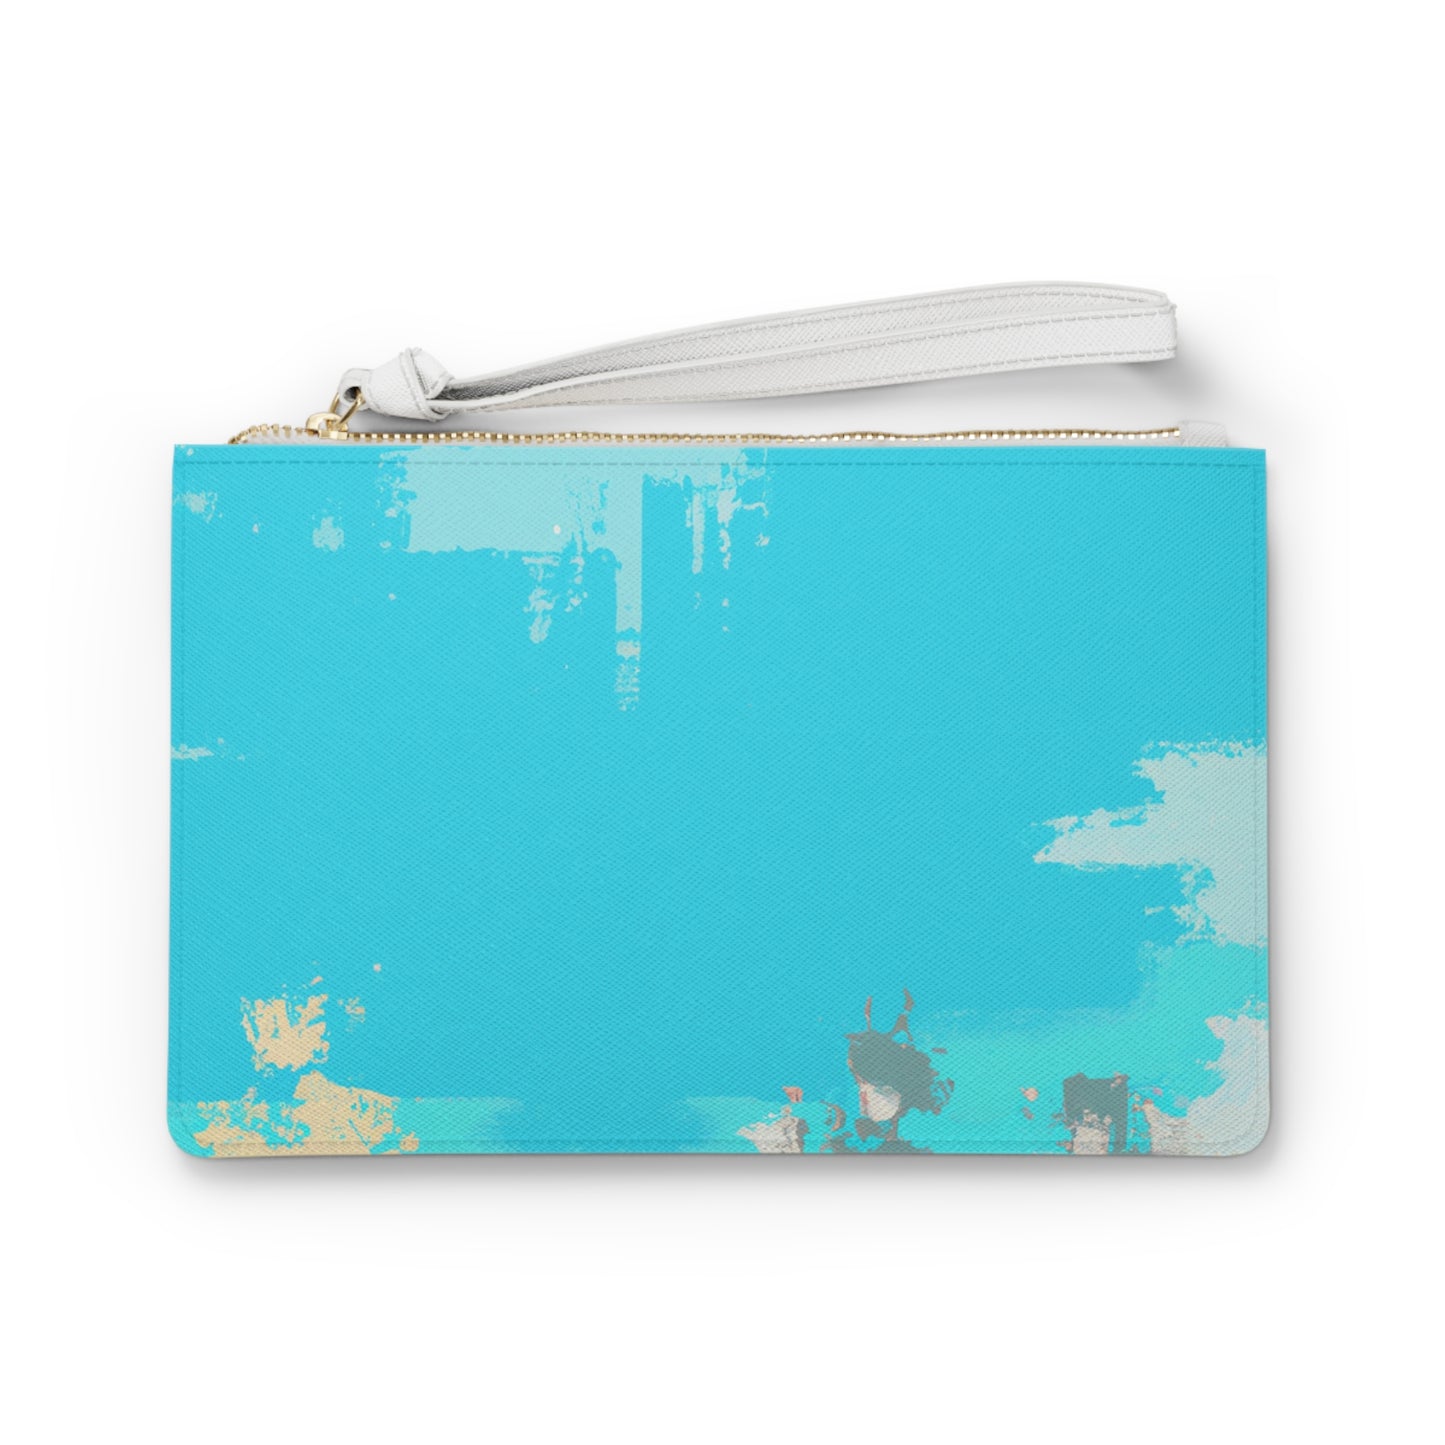 "A Breezy Skyscape: A Combination of Tradition and Modernity" - The Alien Clutch Bag